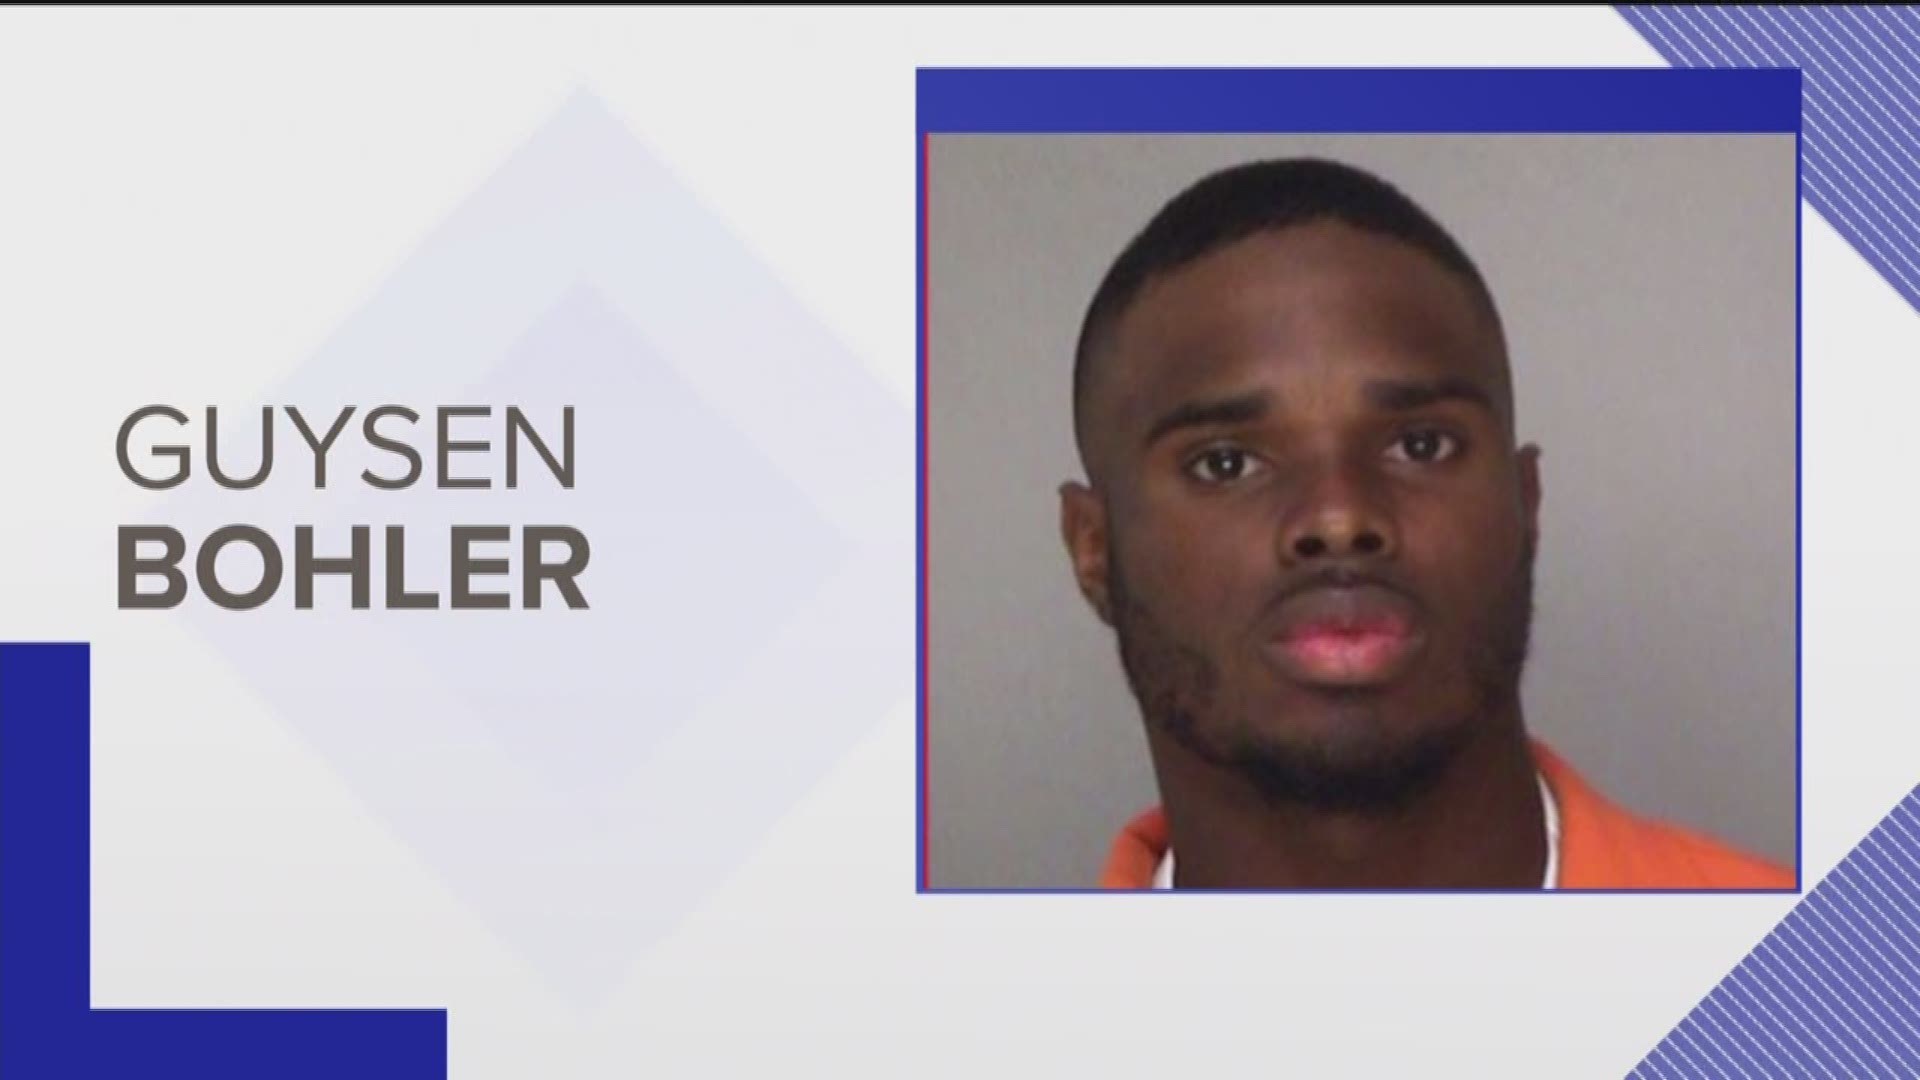 A Mercer University football player is charged with aggravated sexual assault. Bibb County Jail records show 19-year-old defensive back Guysen Bohler was arrested Friday morning.